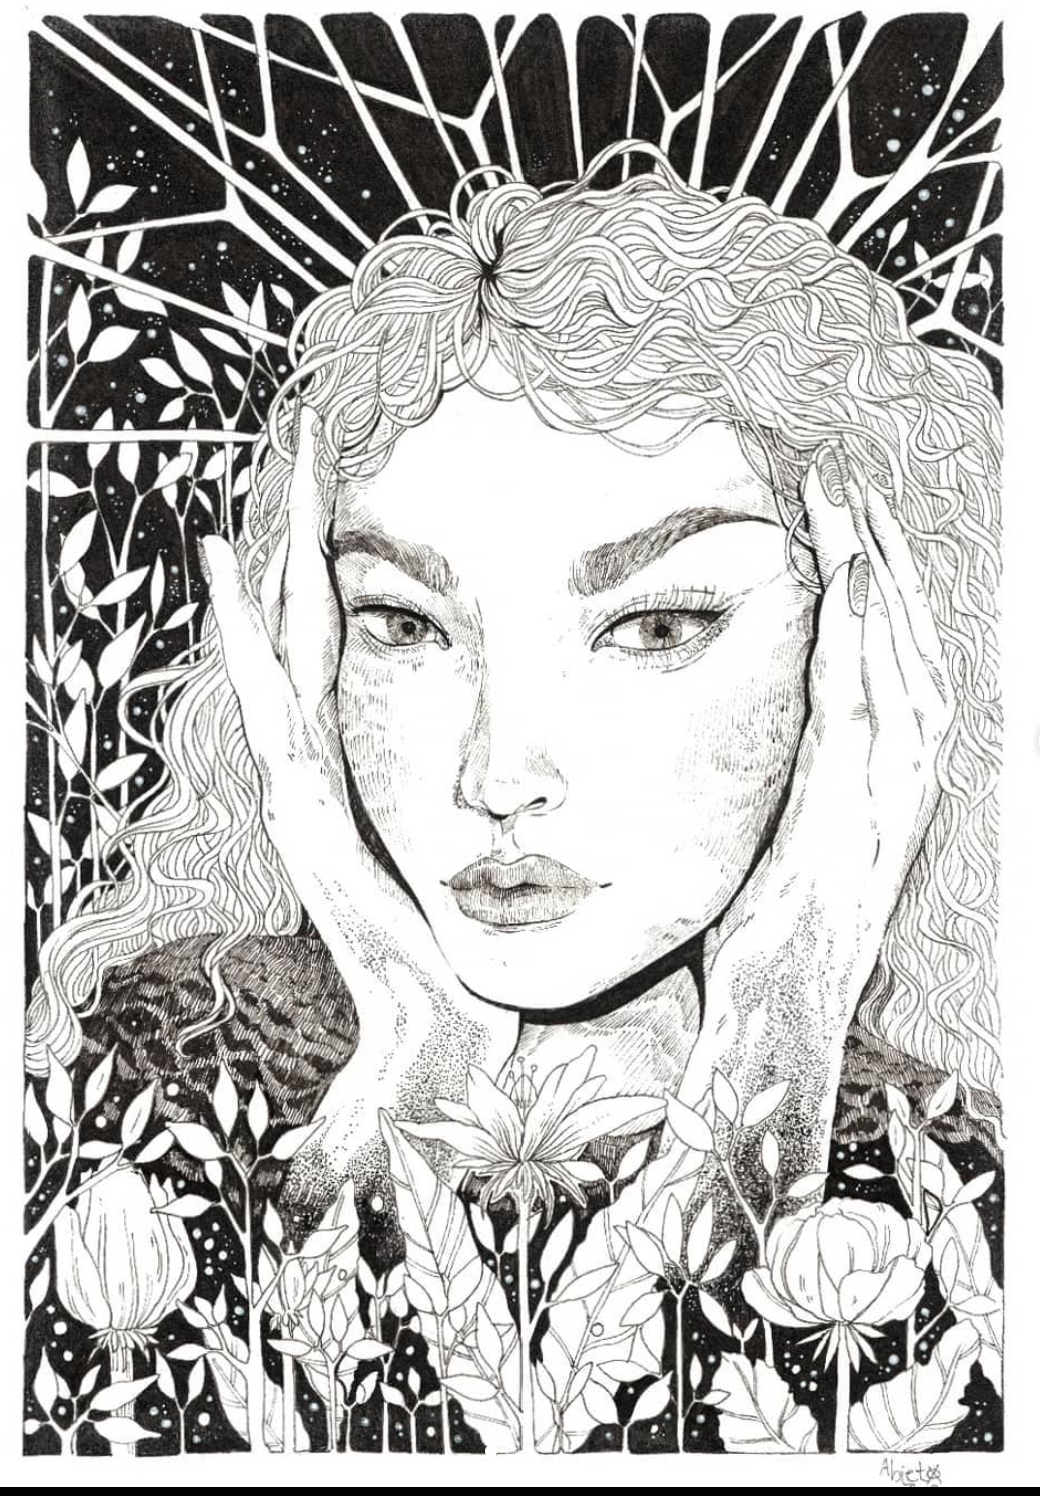 Pen and ink drawing by featured artist, Emi Olin, aka, Abieto.